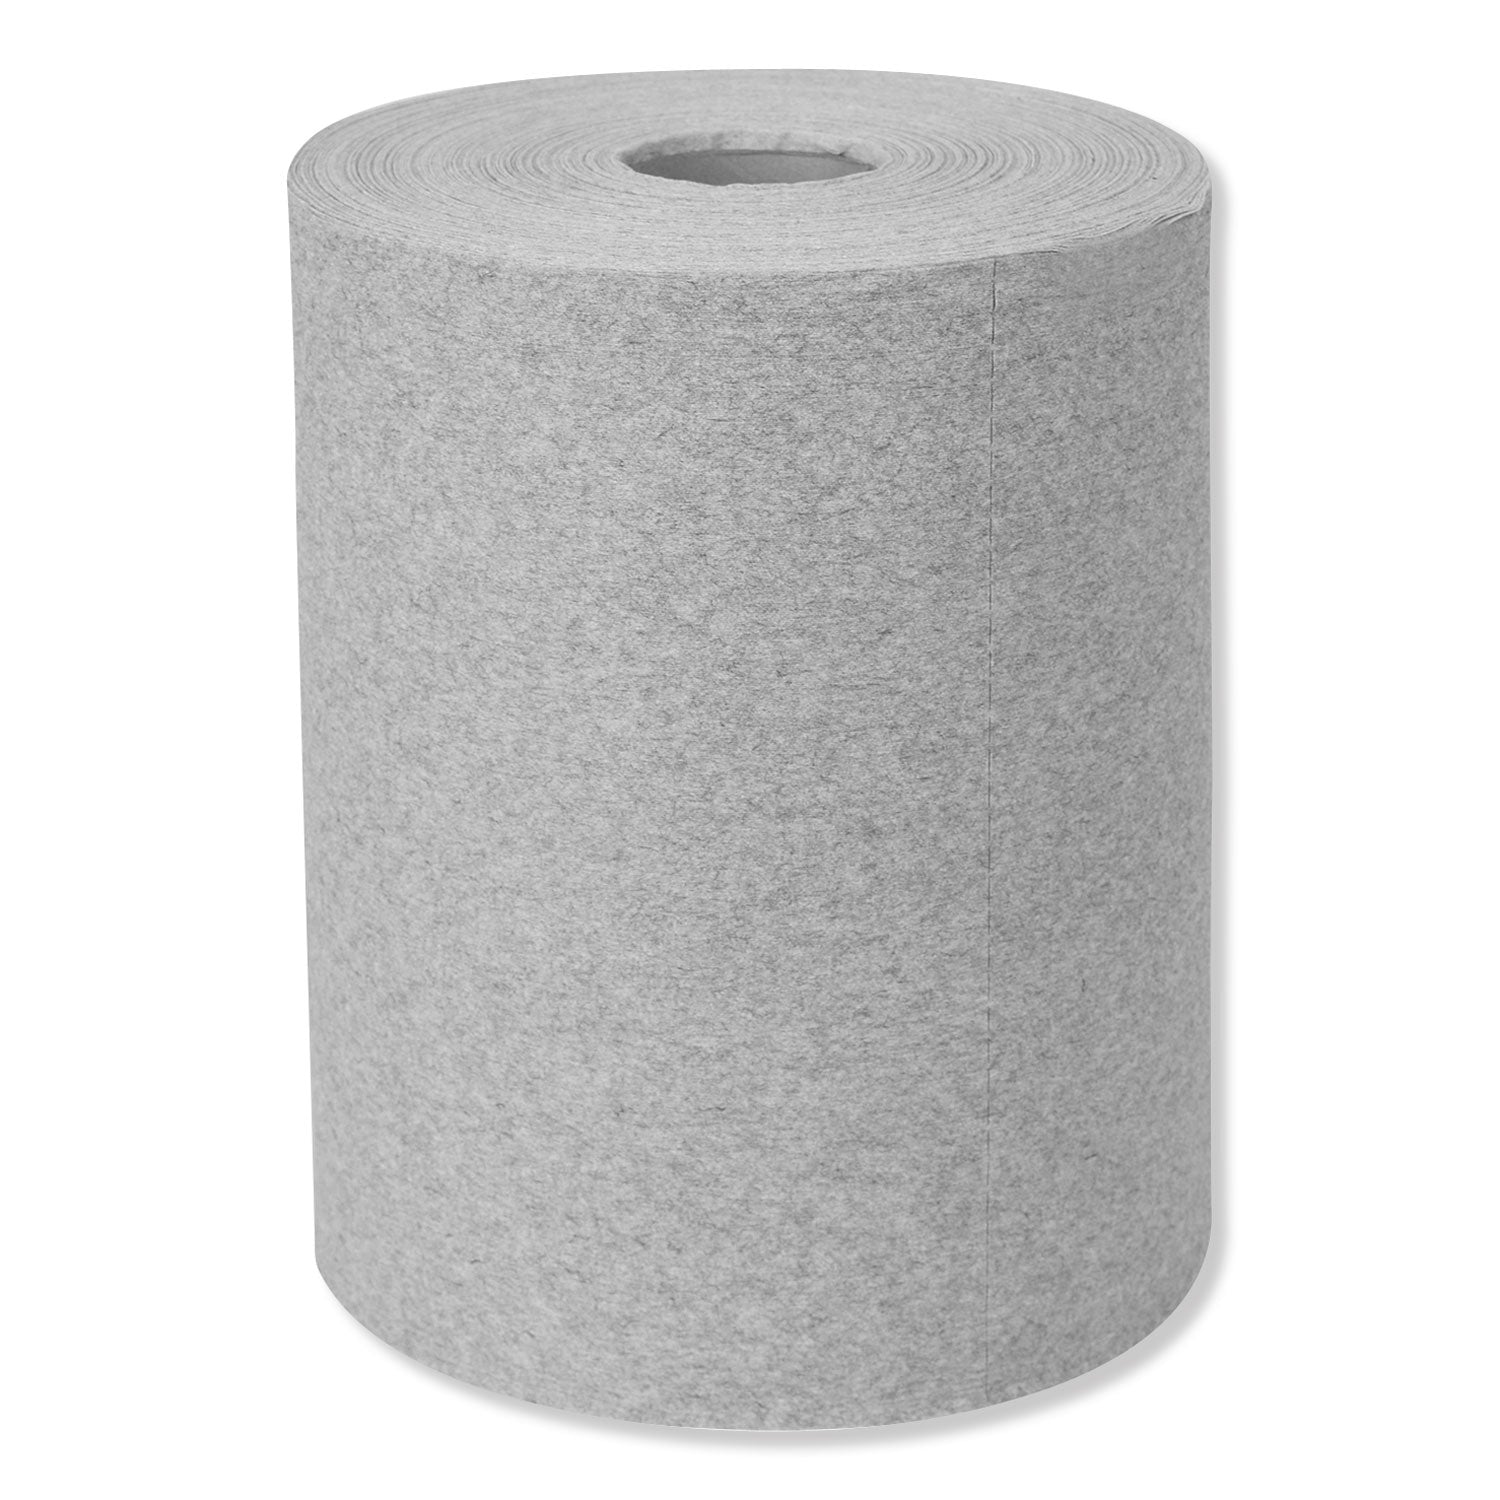 industrial-cleaning-cloths-1-ply-126-x-10-gray-500-wipes-roll_trk520337 - 5